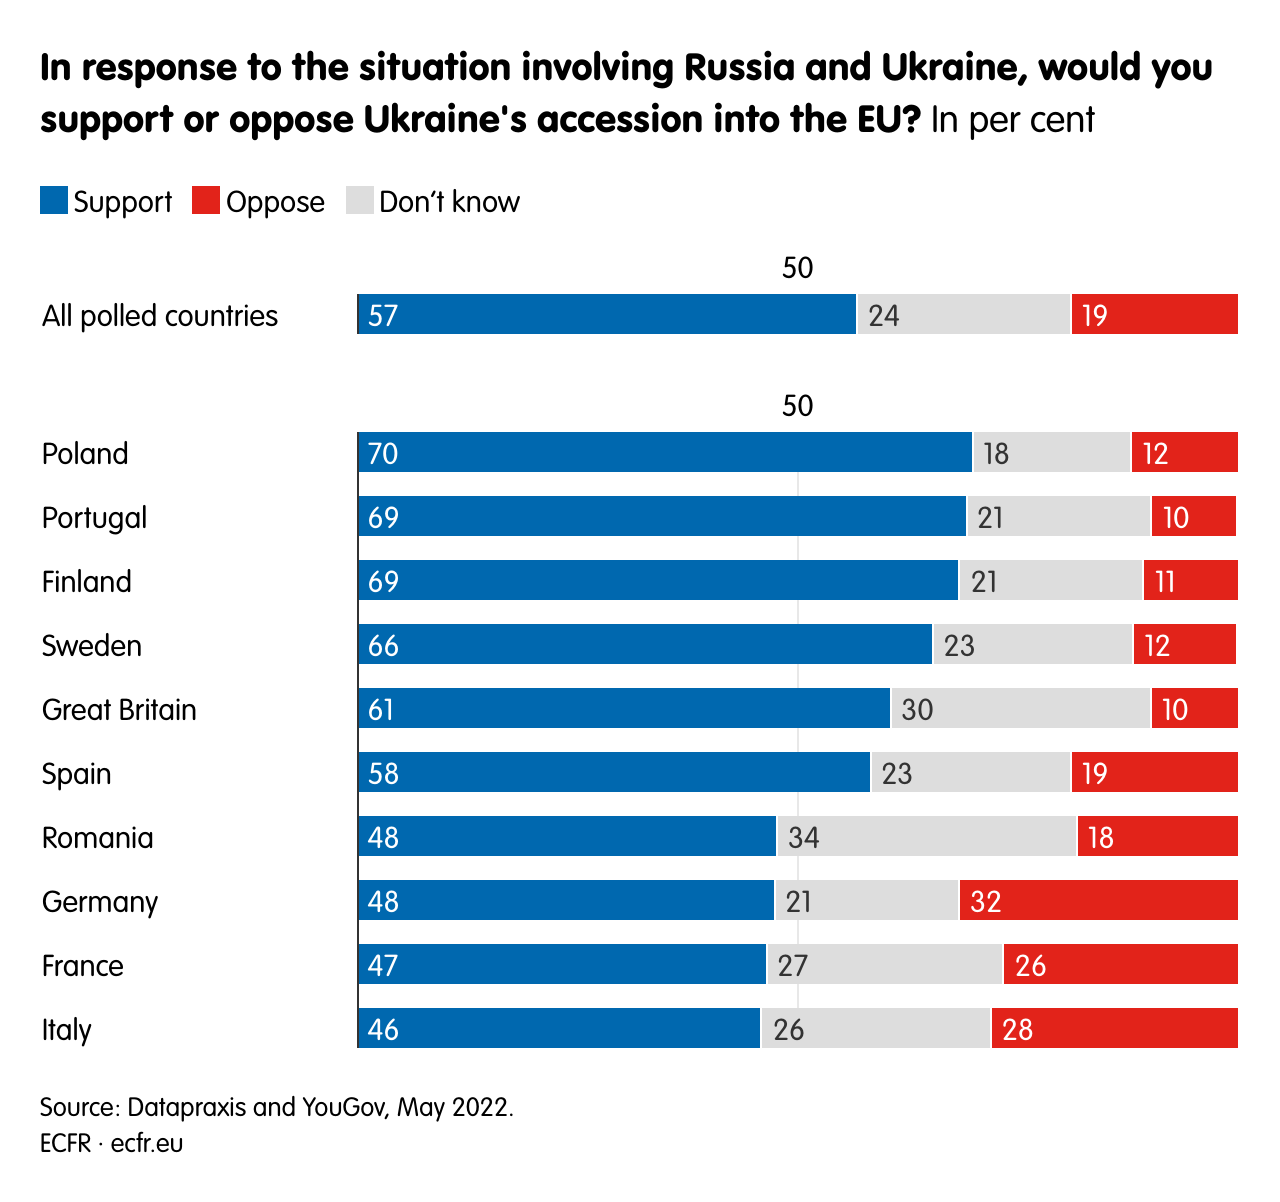 In response to the situation involving Russia and Ukraine, would you support or oppose Ukraine's accession into the EU?